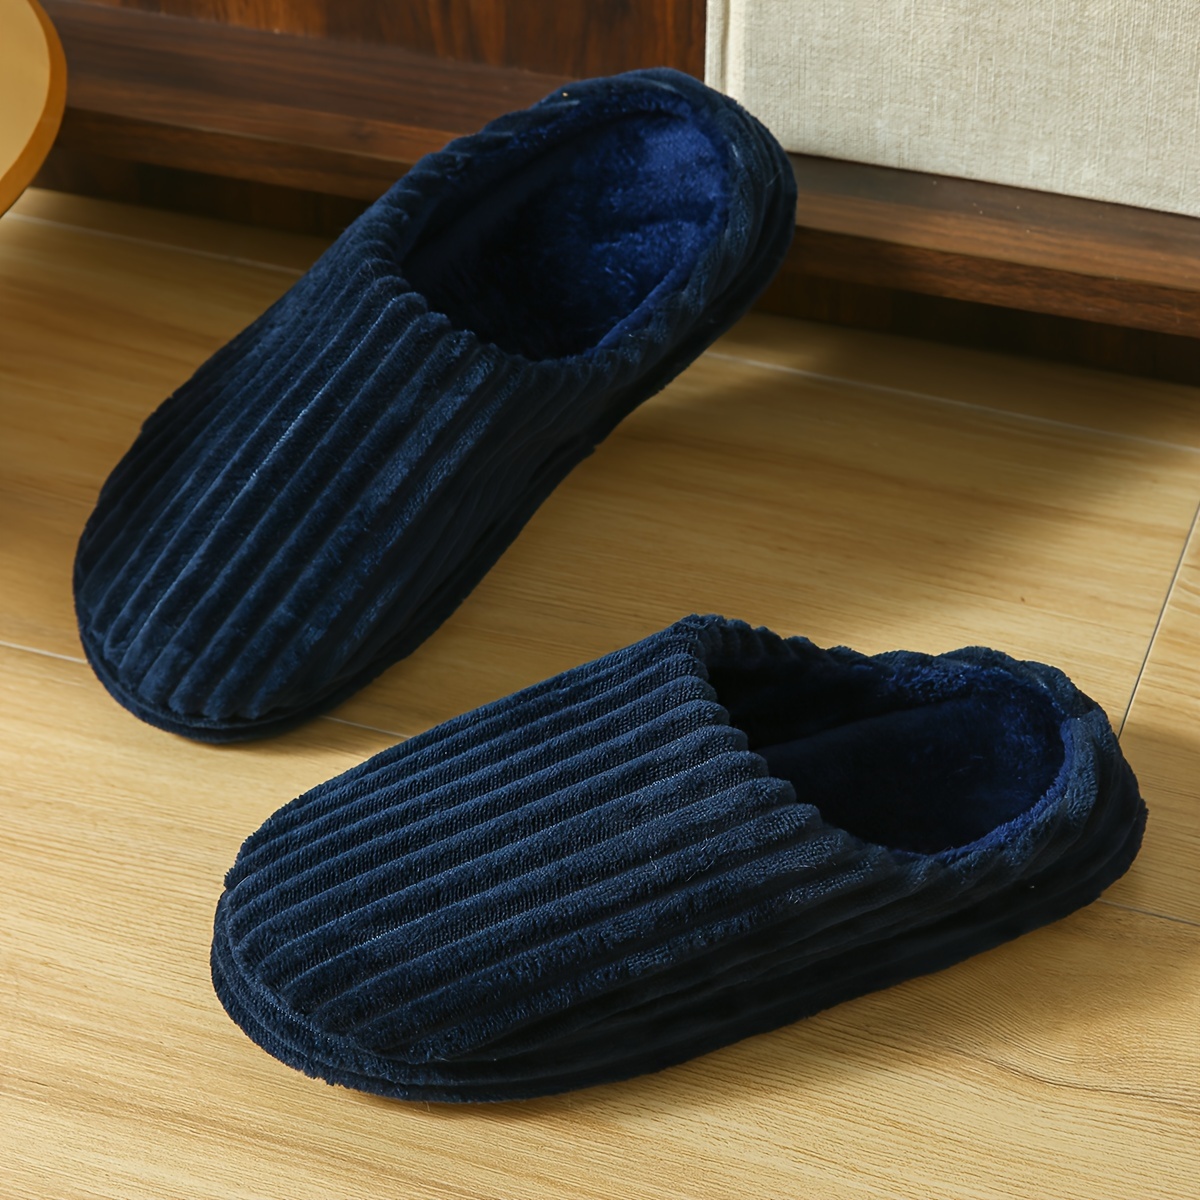 

Men's Solid Colour Warm Cozy Slides, Comfortable Fuzzy Soft Slippers, Plush Comfy Non-slip Home Shoes For Indoor Outdoor Bedroom